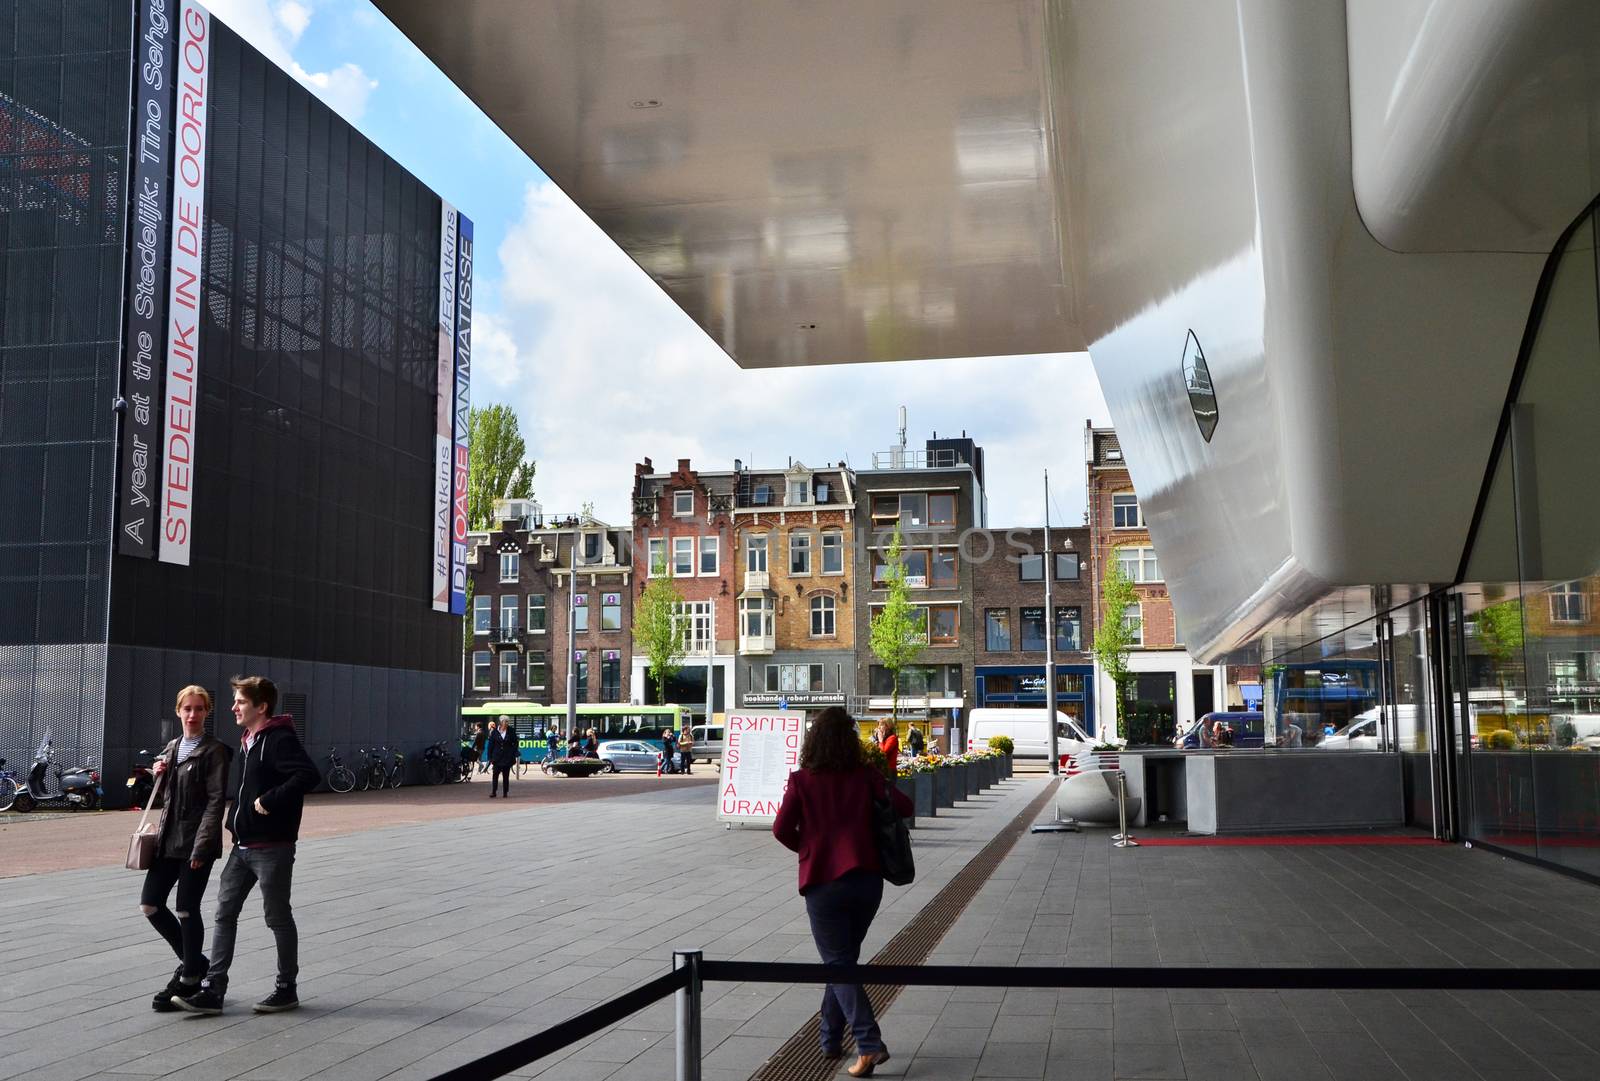 Amsterdam, Netherlands - May 6, 2015: People visit famous Stedelijk Museum in Amsterdam by siraanamwong